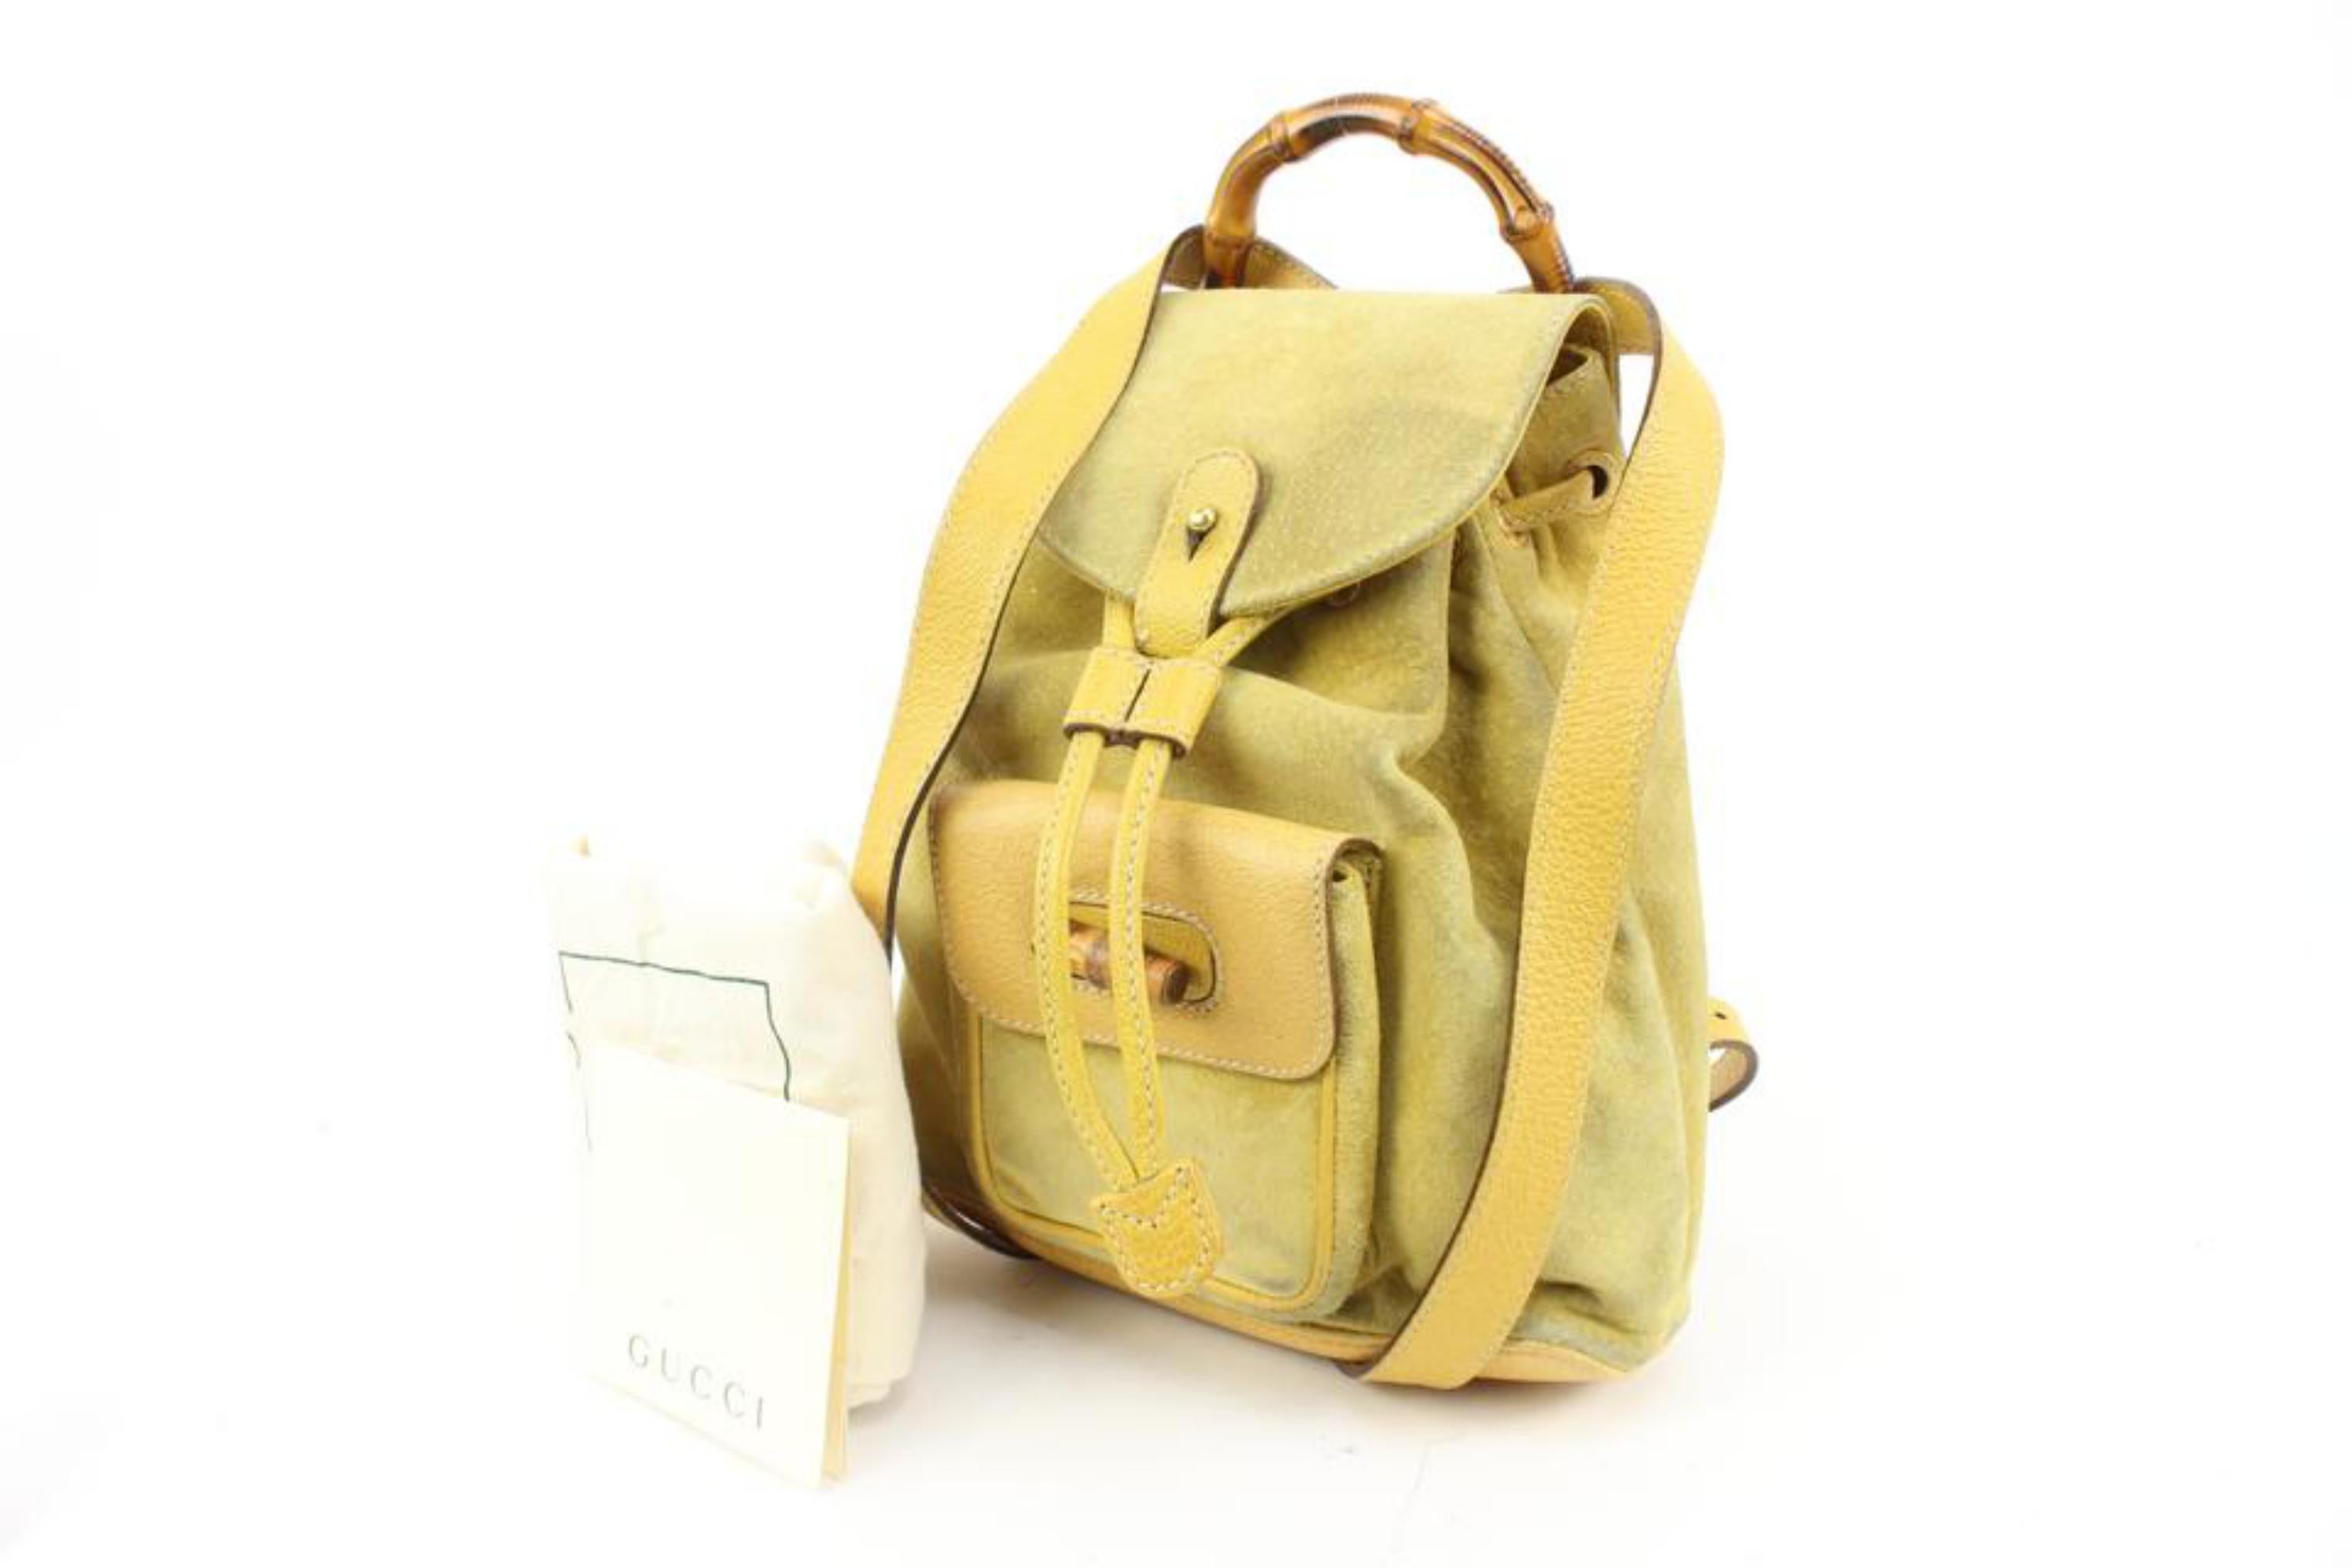 Gucci Yellow Suede Mini Bamboo Backpack 54gz421s
Date Code/Serial Number: 003-2058-0030
Made In: Italy
Measurements: Length:  9.5